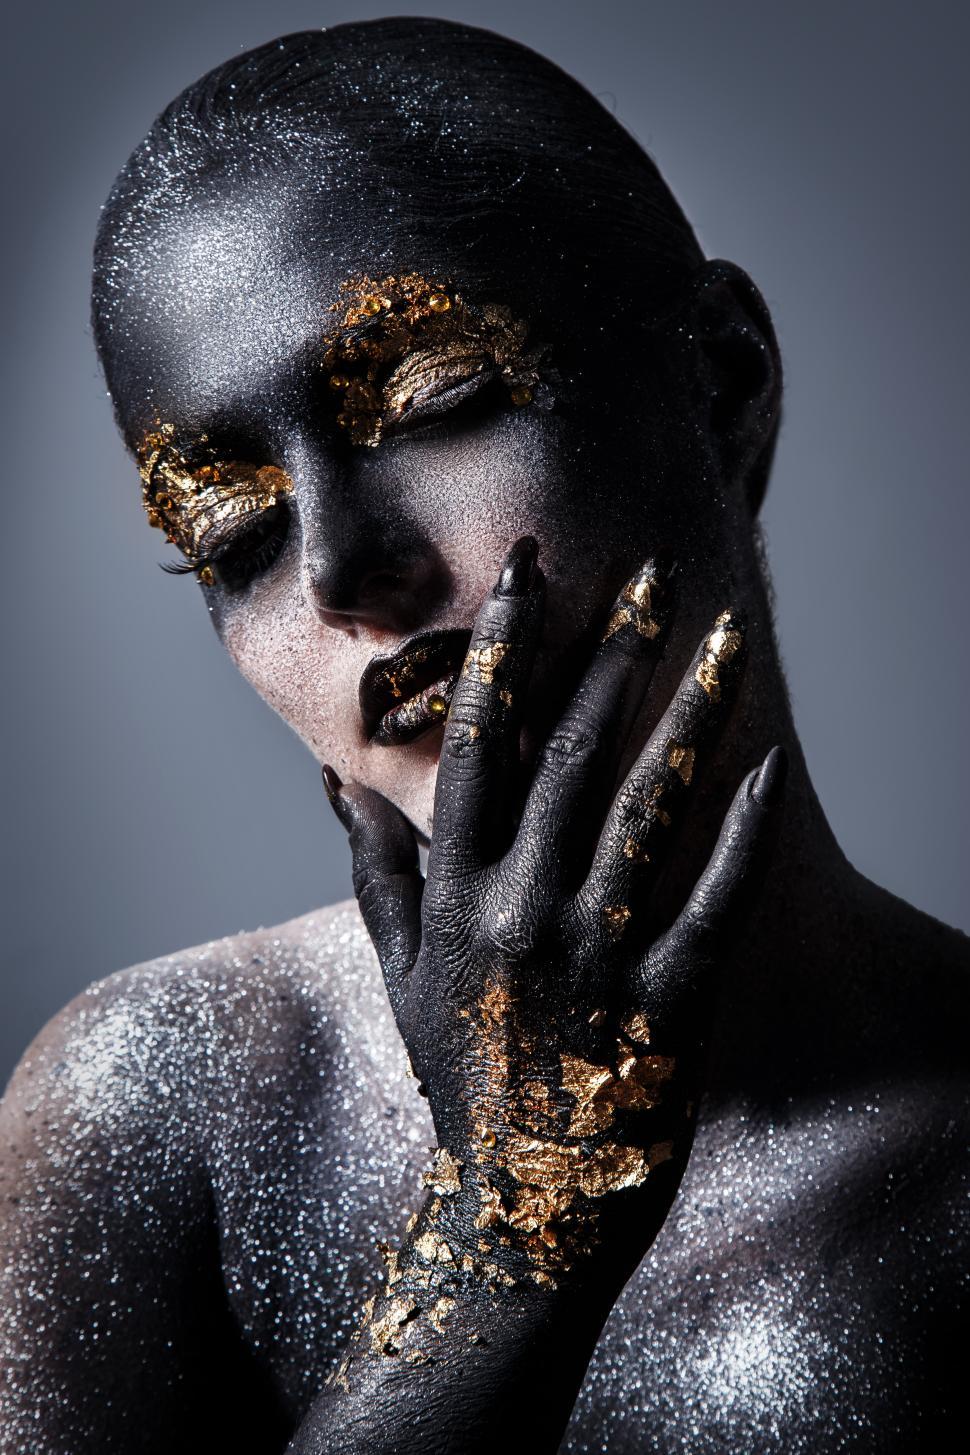 Stunning Picture of a Woman with Gold Body Paint and a Serious